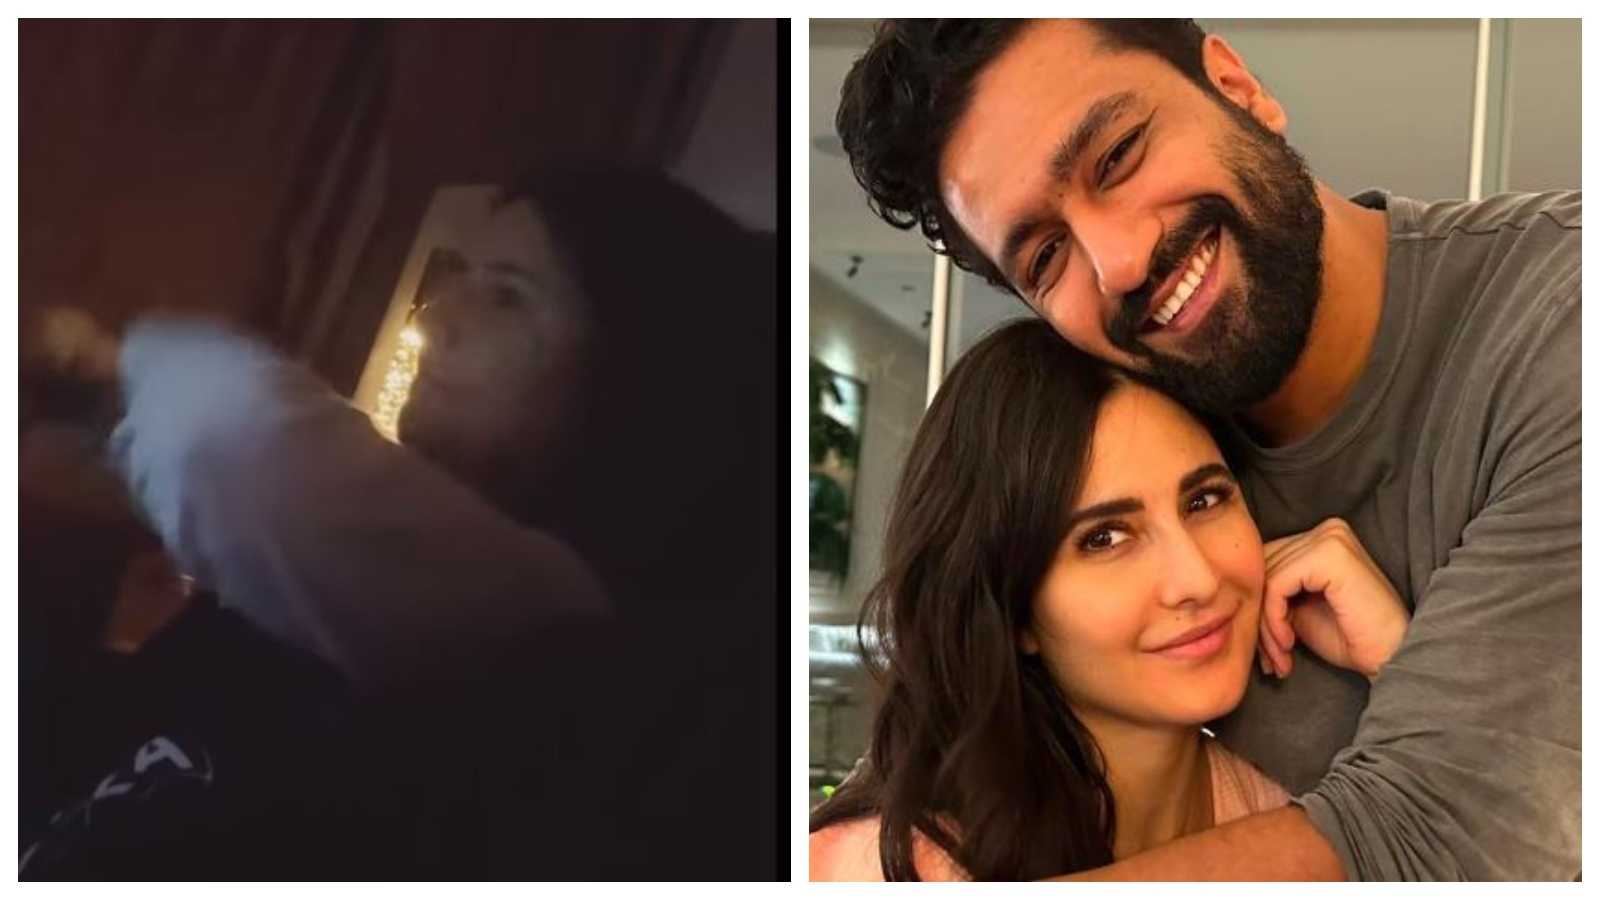 'Is she aware of being recorded?': Vicky Kaushal shares cute in-flight video of Katrina Kaif on 2nd wedding anniversary, netizens react